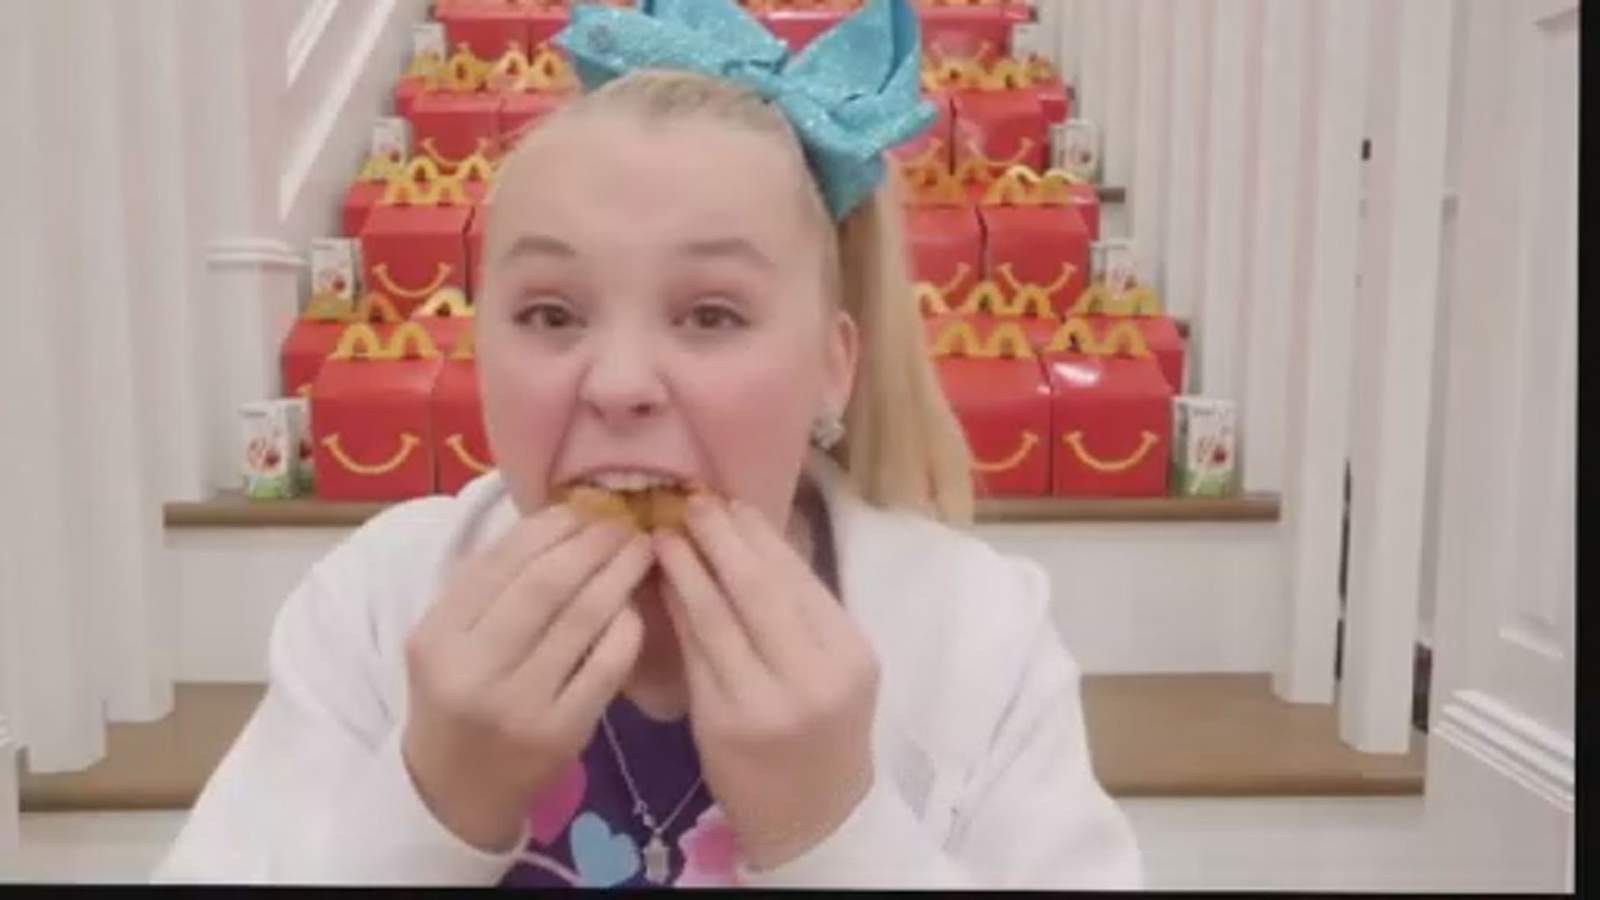 ‘Kidfluencers’ are targeting your children with junk food ads